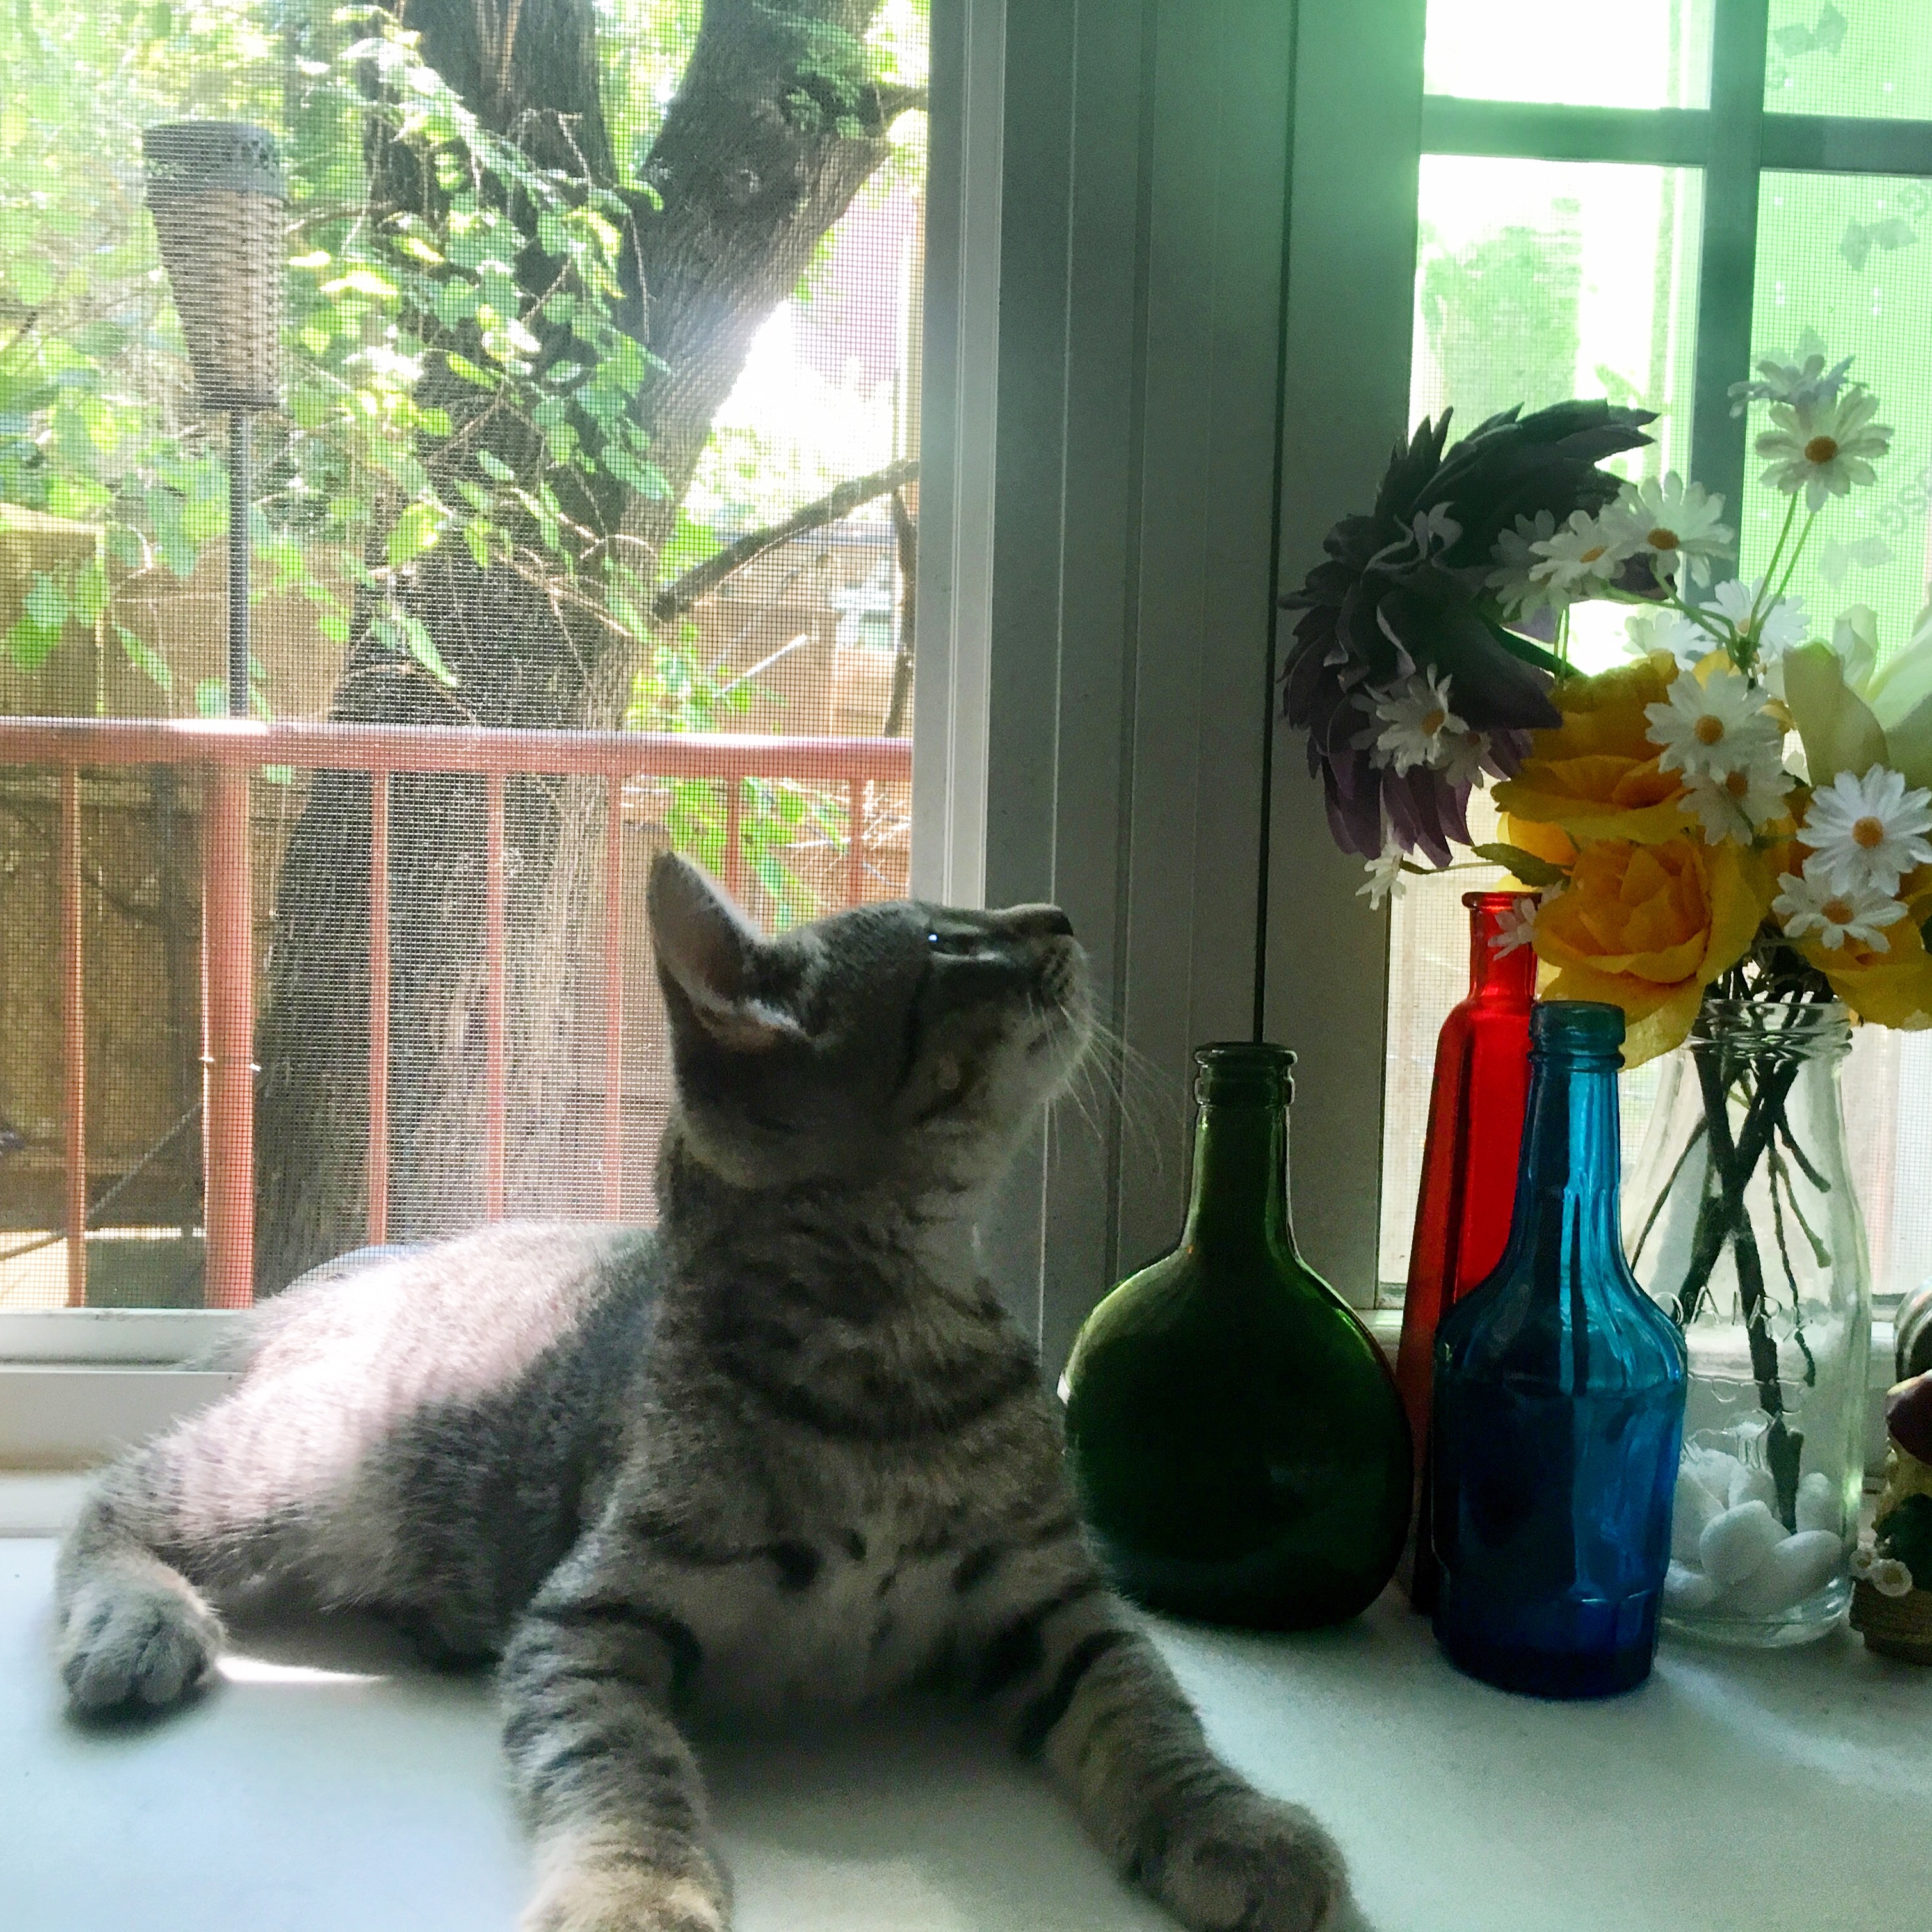 A brown and gray tabby kitten lying on a windowsill beside some vases of fake flowers. He is looking up at the flowers.